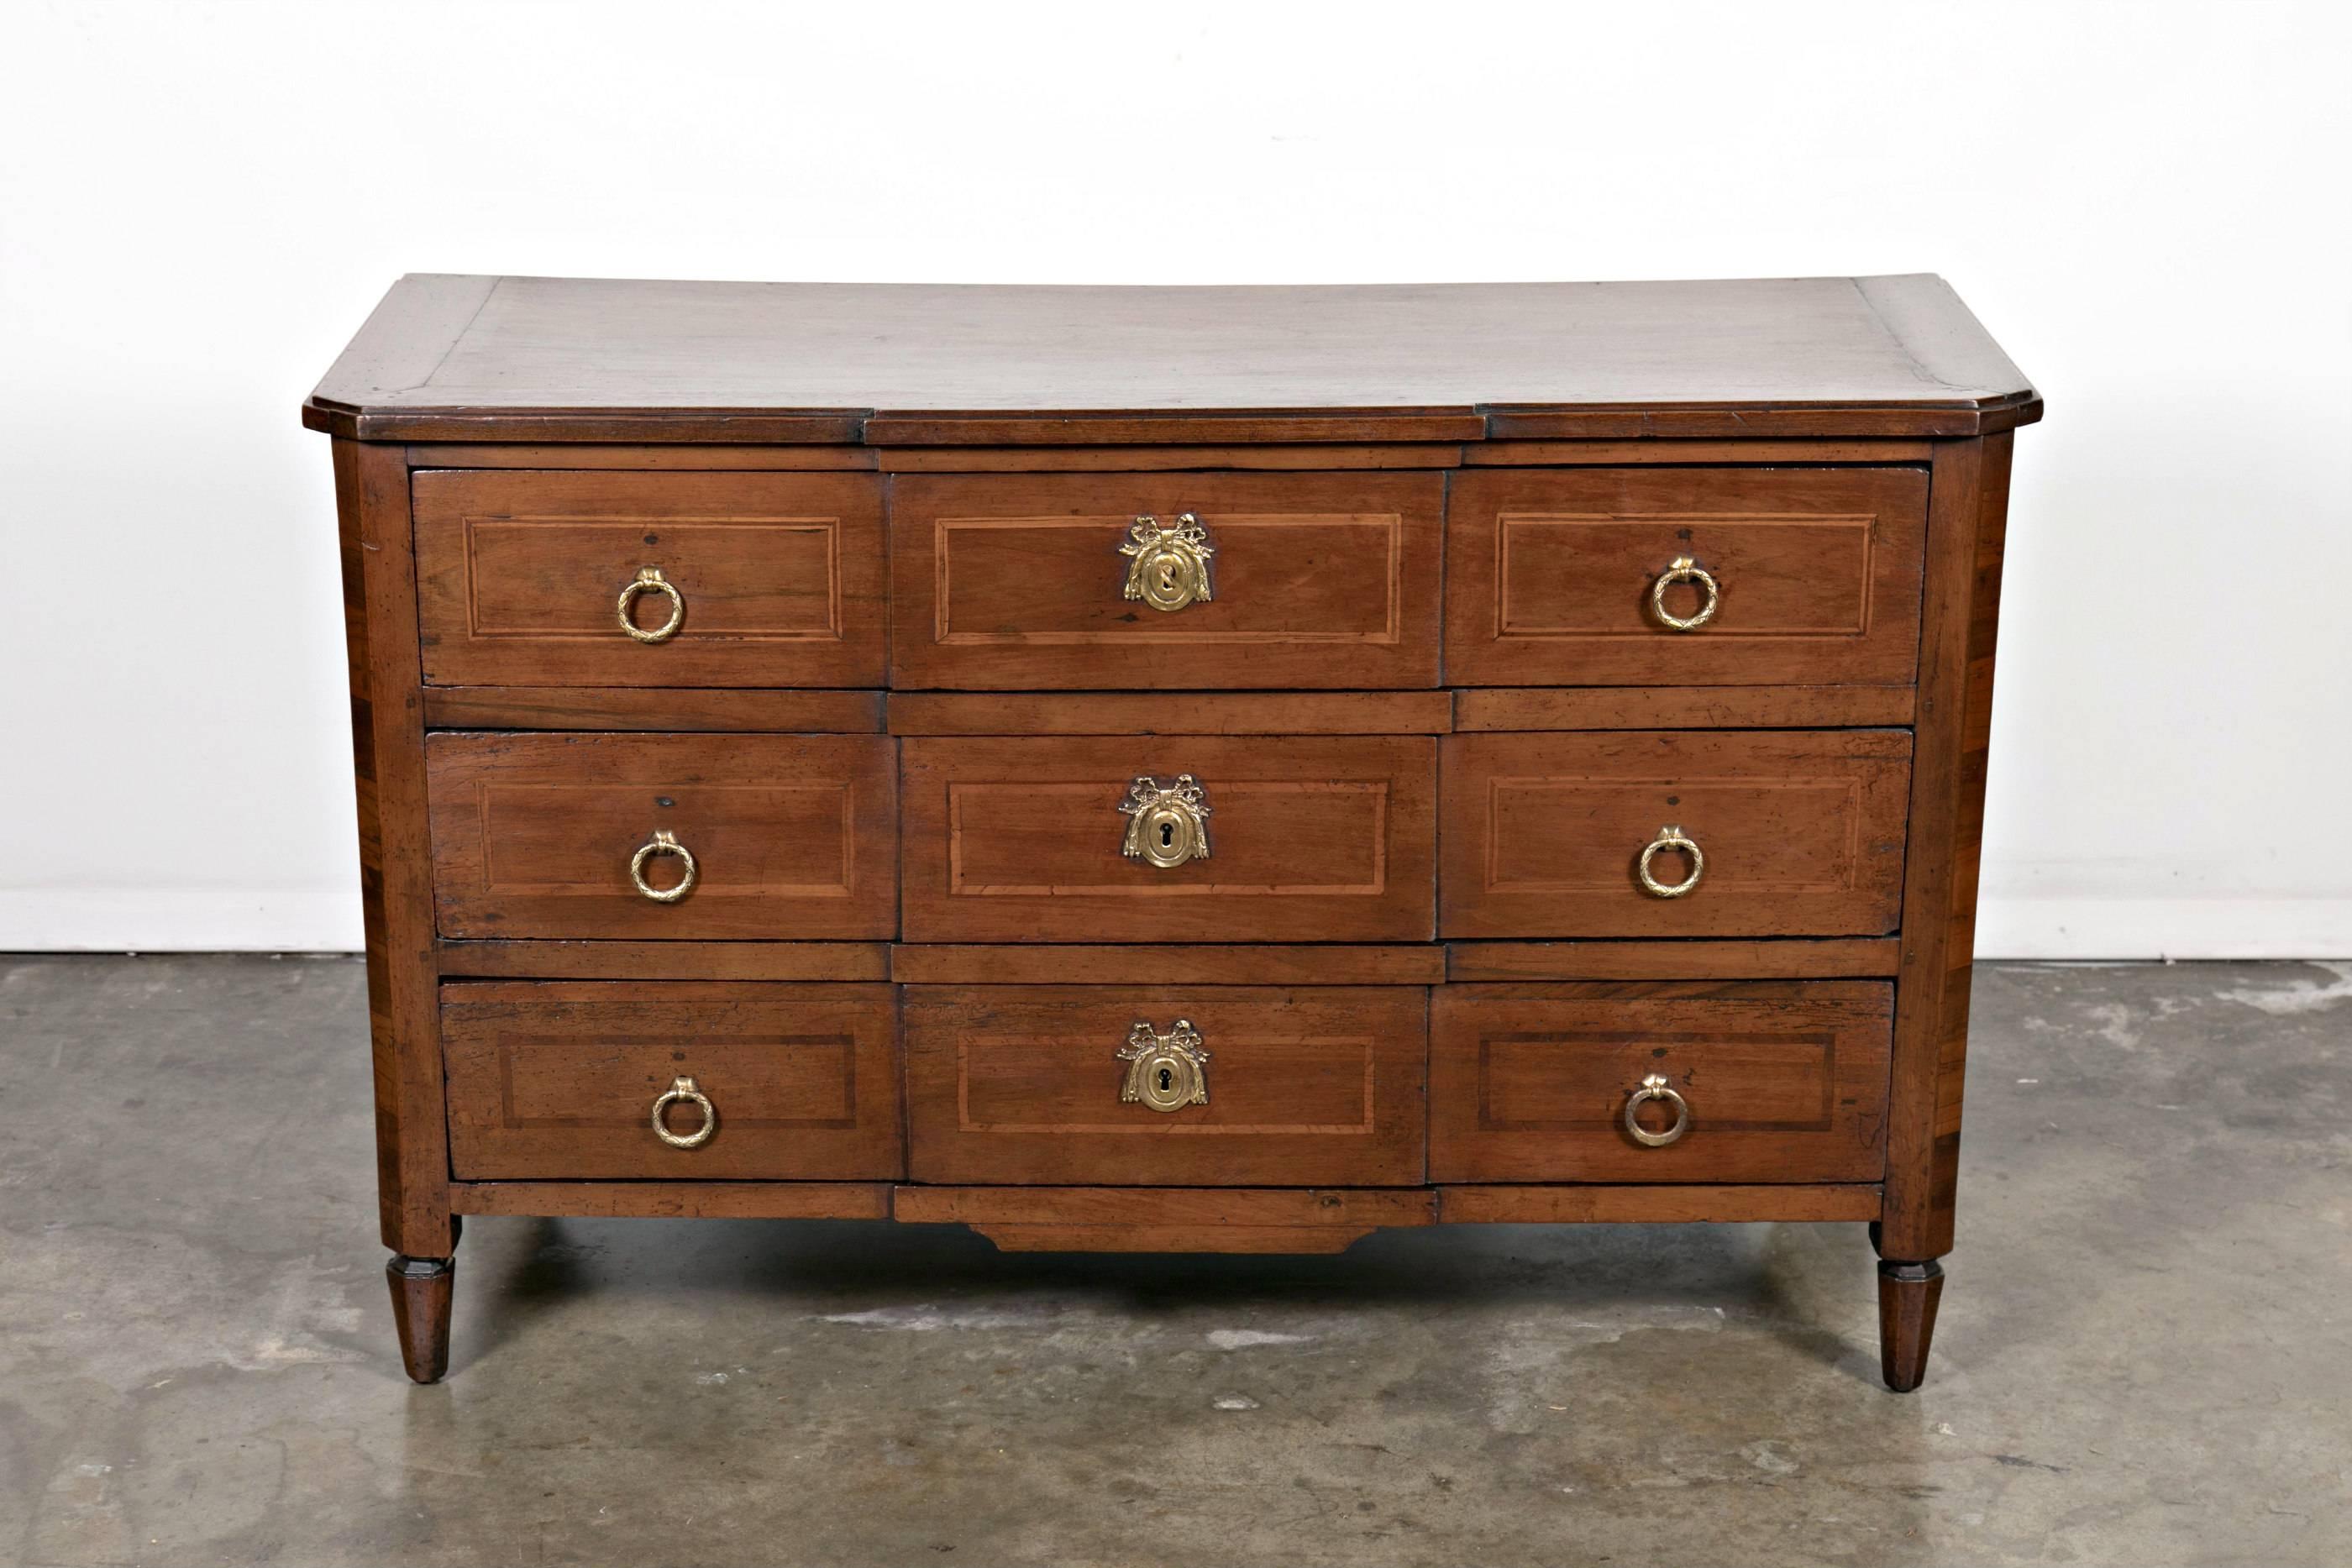 A Fine late 18th century period Louis XVI petite Parisian commode in neoclassical form handcrafted by master artisans in walnut and fruitwood marquetry, having a rectangular top with canted front corners sitting above three drawers adorned with